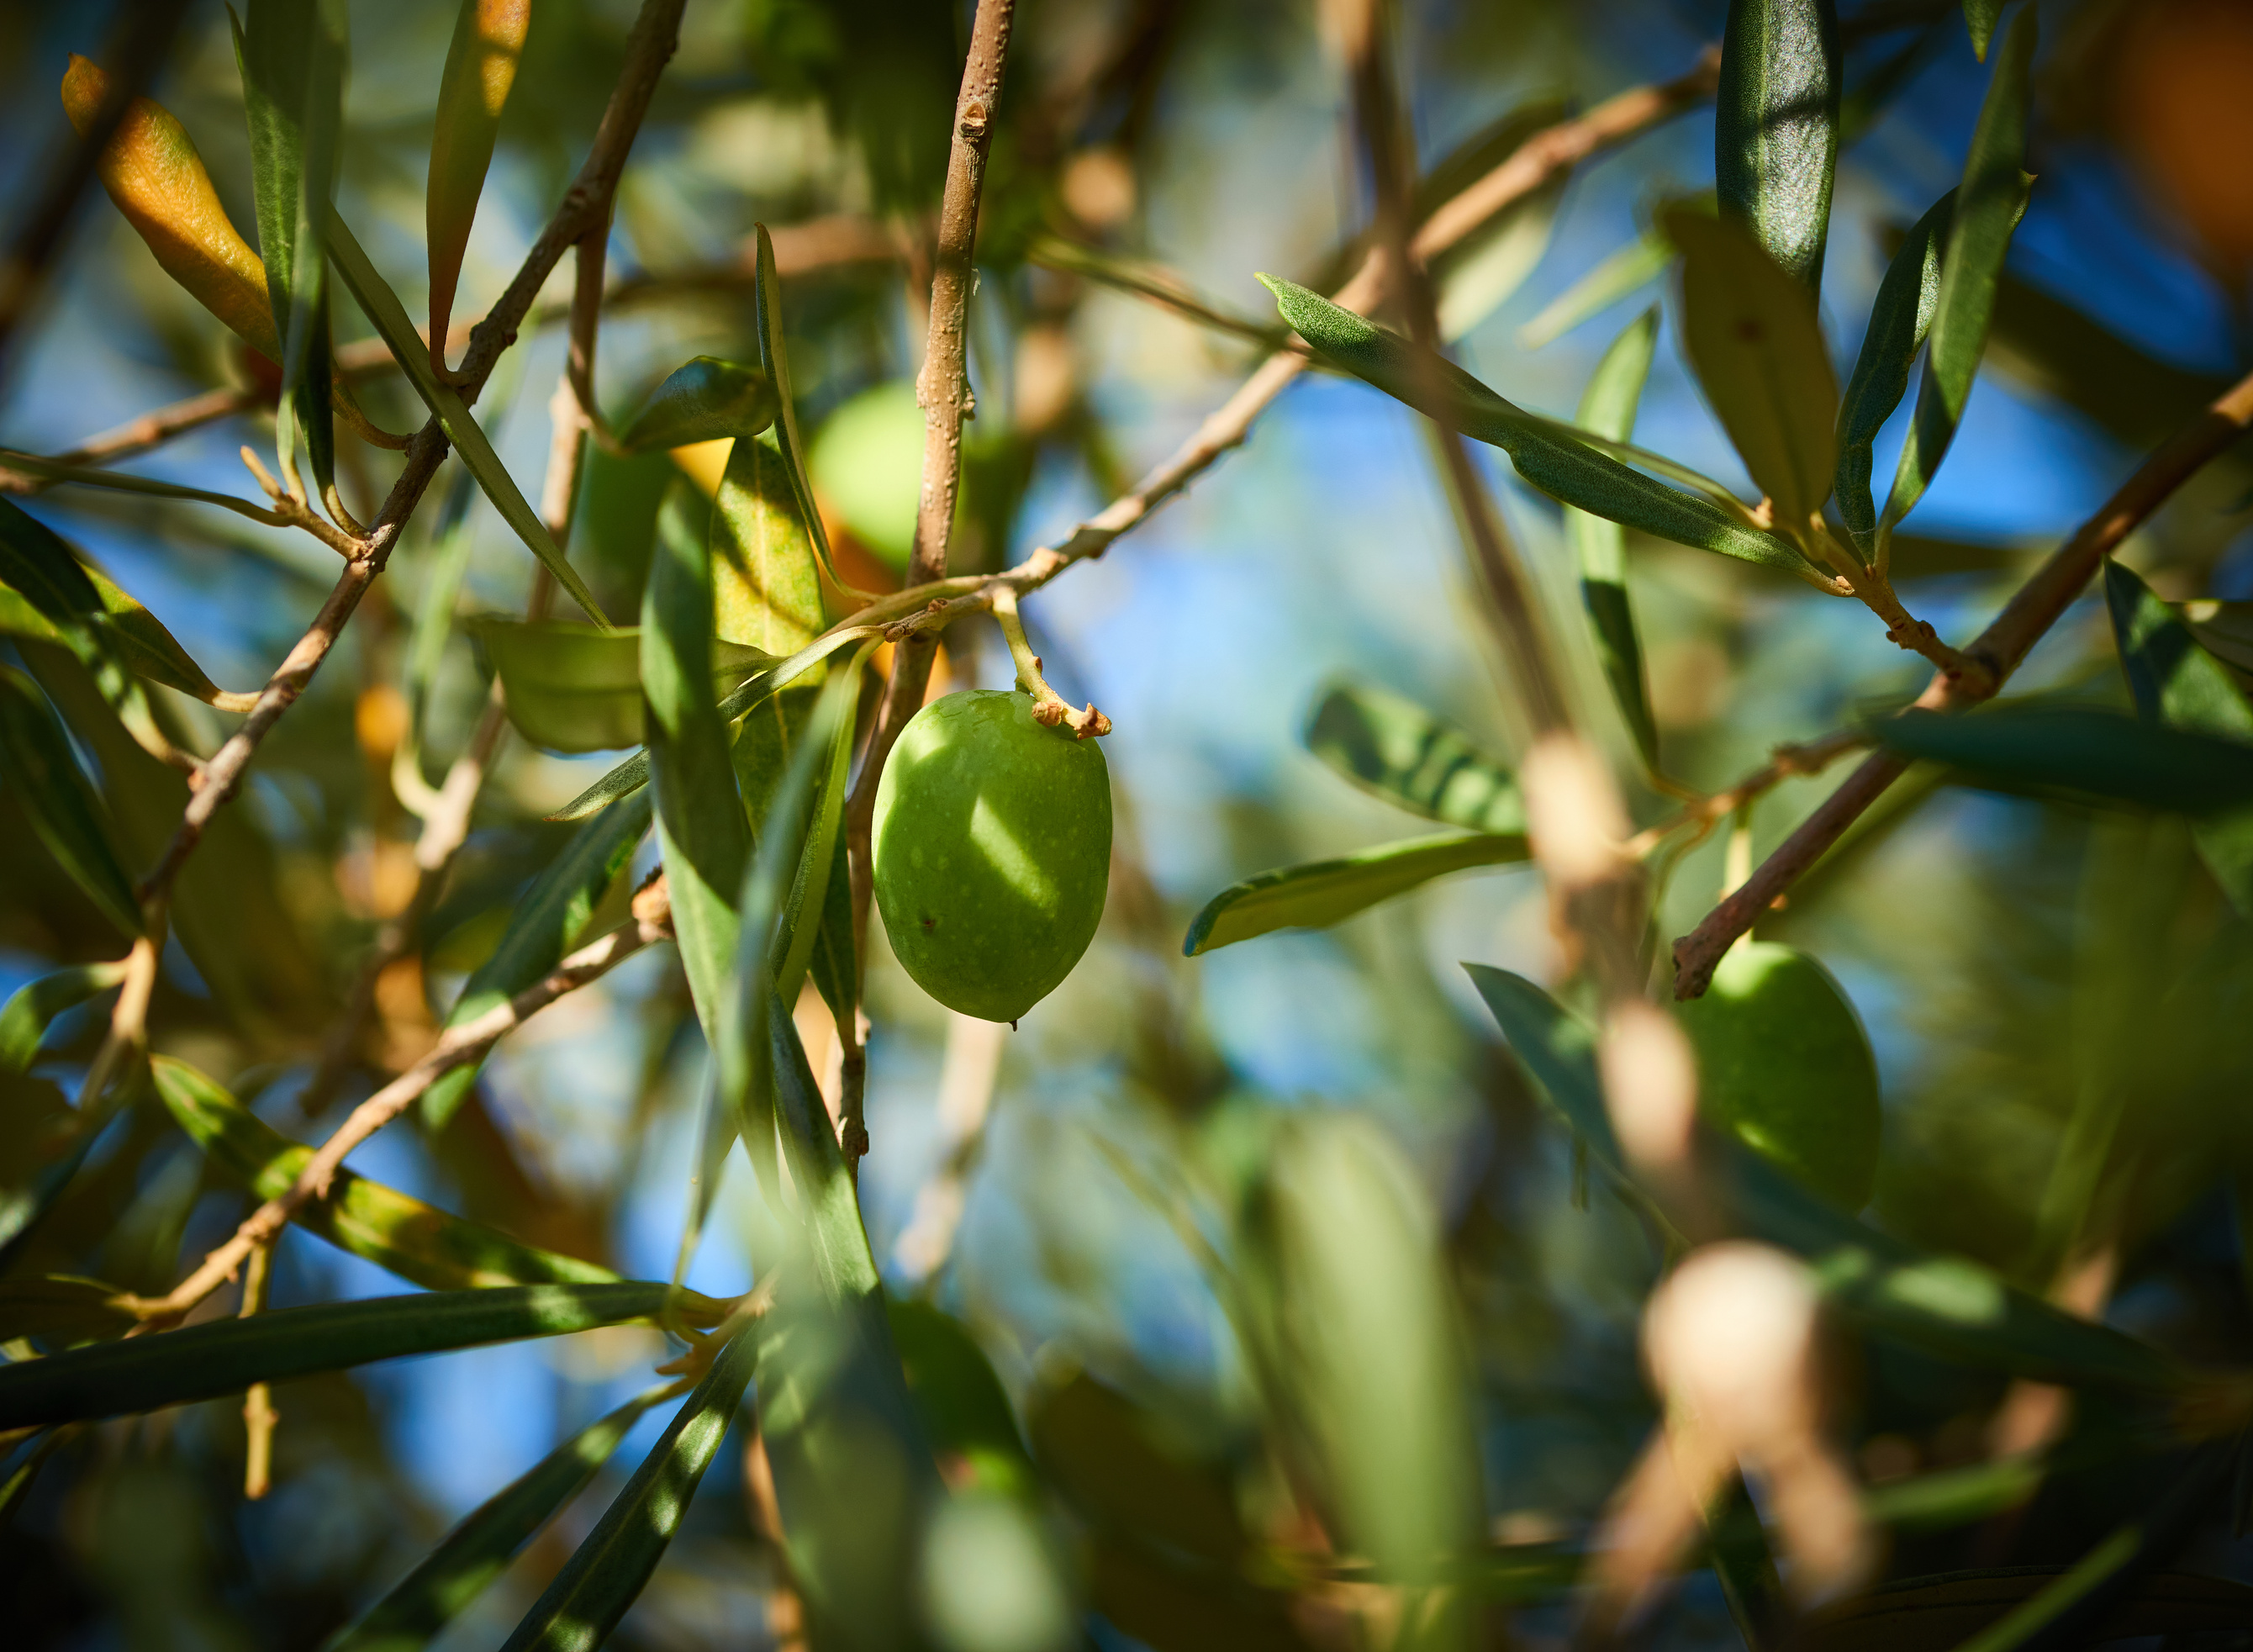 Some olives on the tree